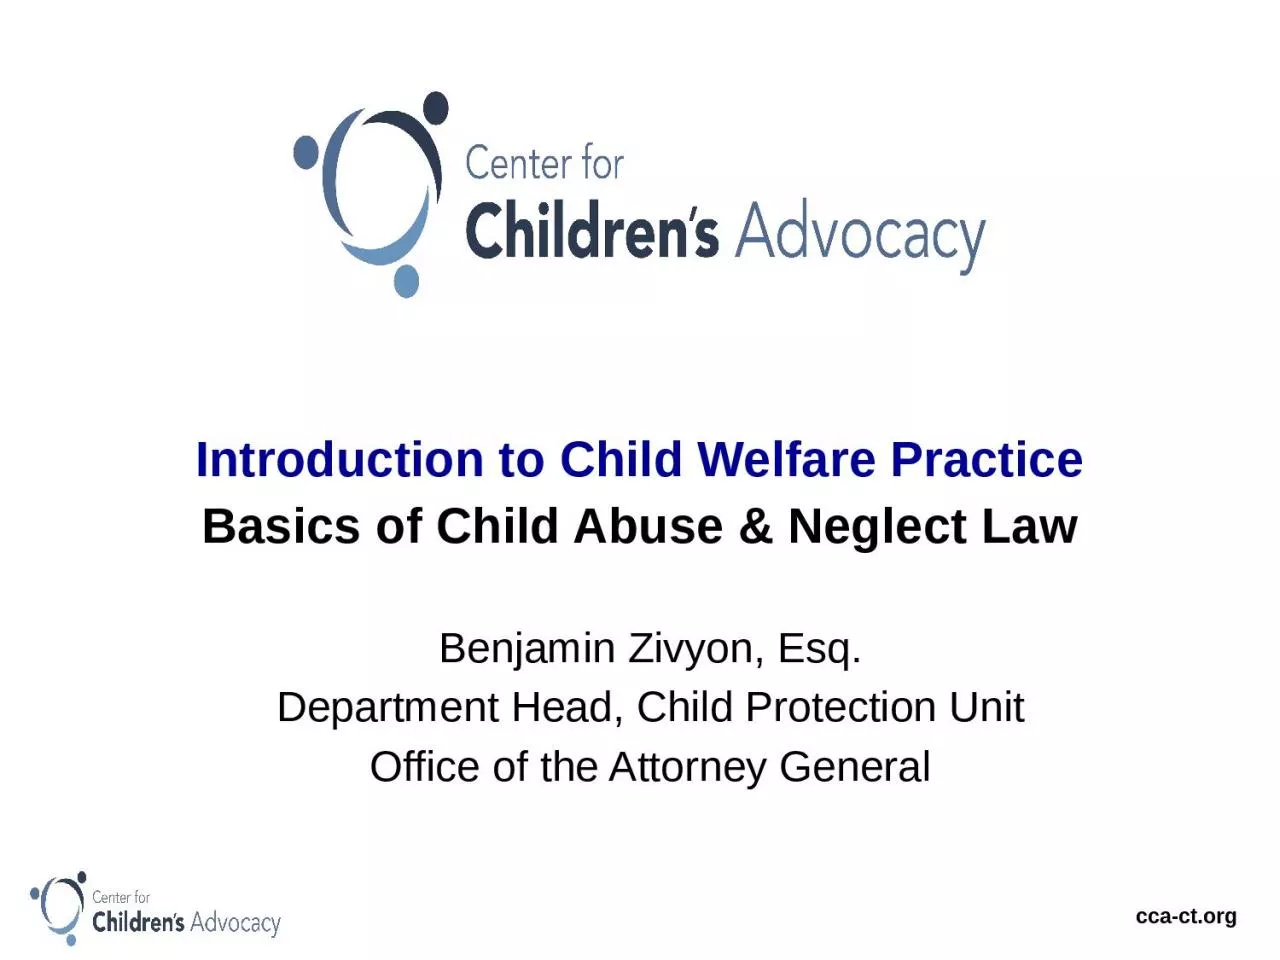 Introduction to Child Welfare Practice